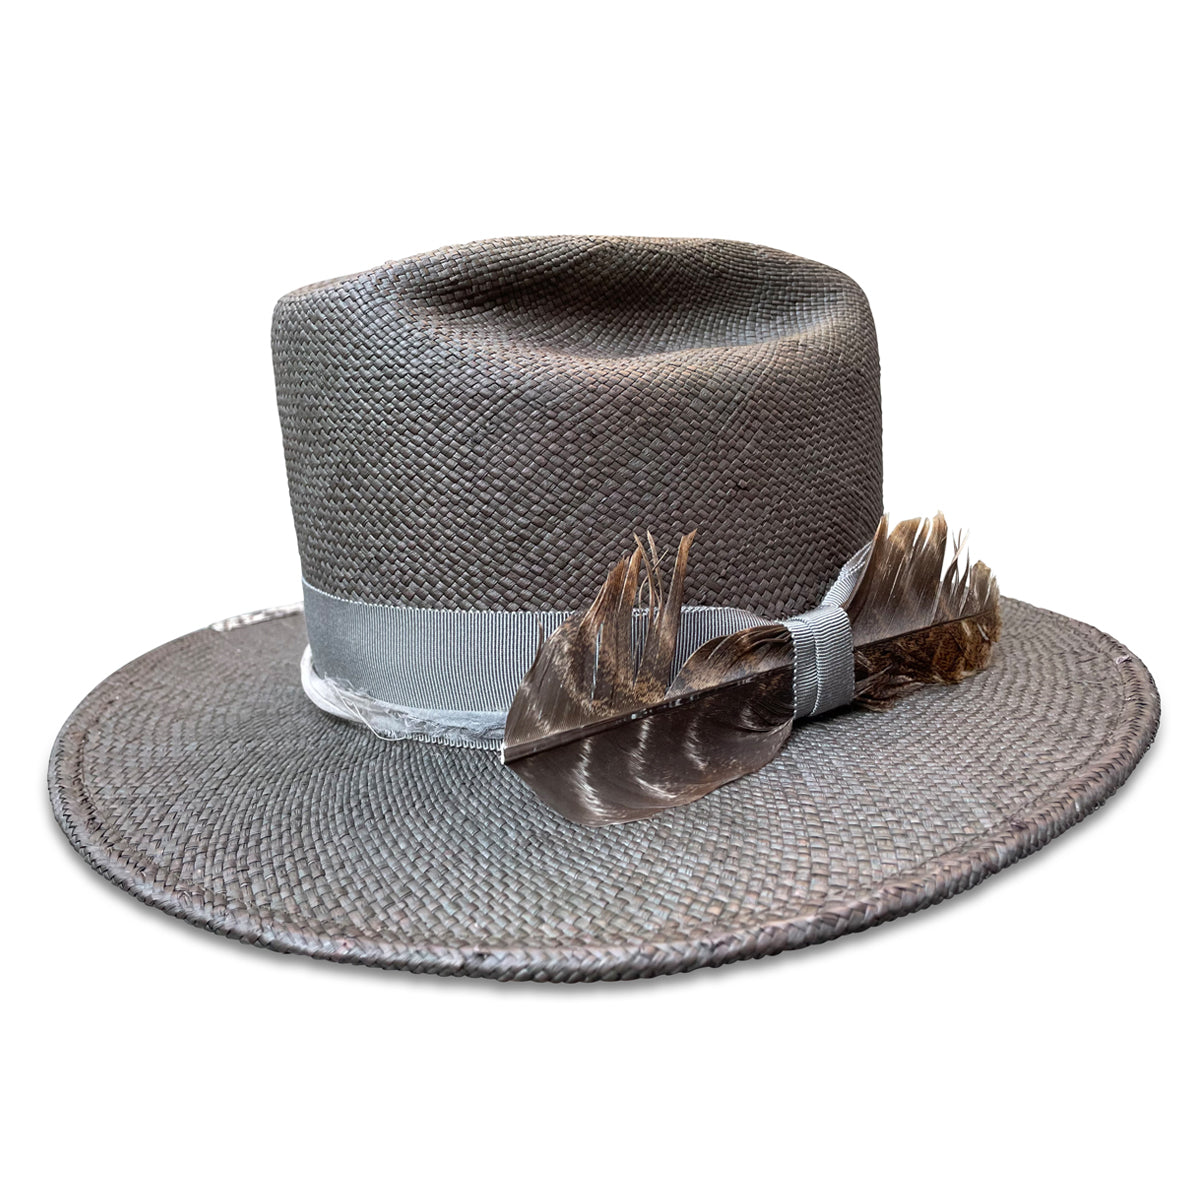 Elegant straw cowboy hat by Cha Cha's, combining traditional and modern elements with a rock and roll edge.